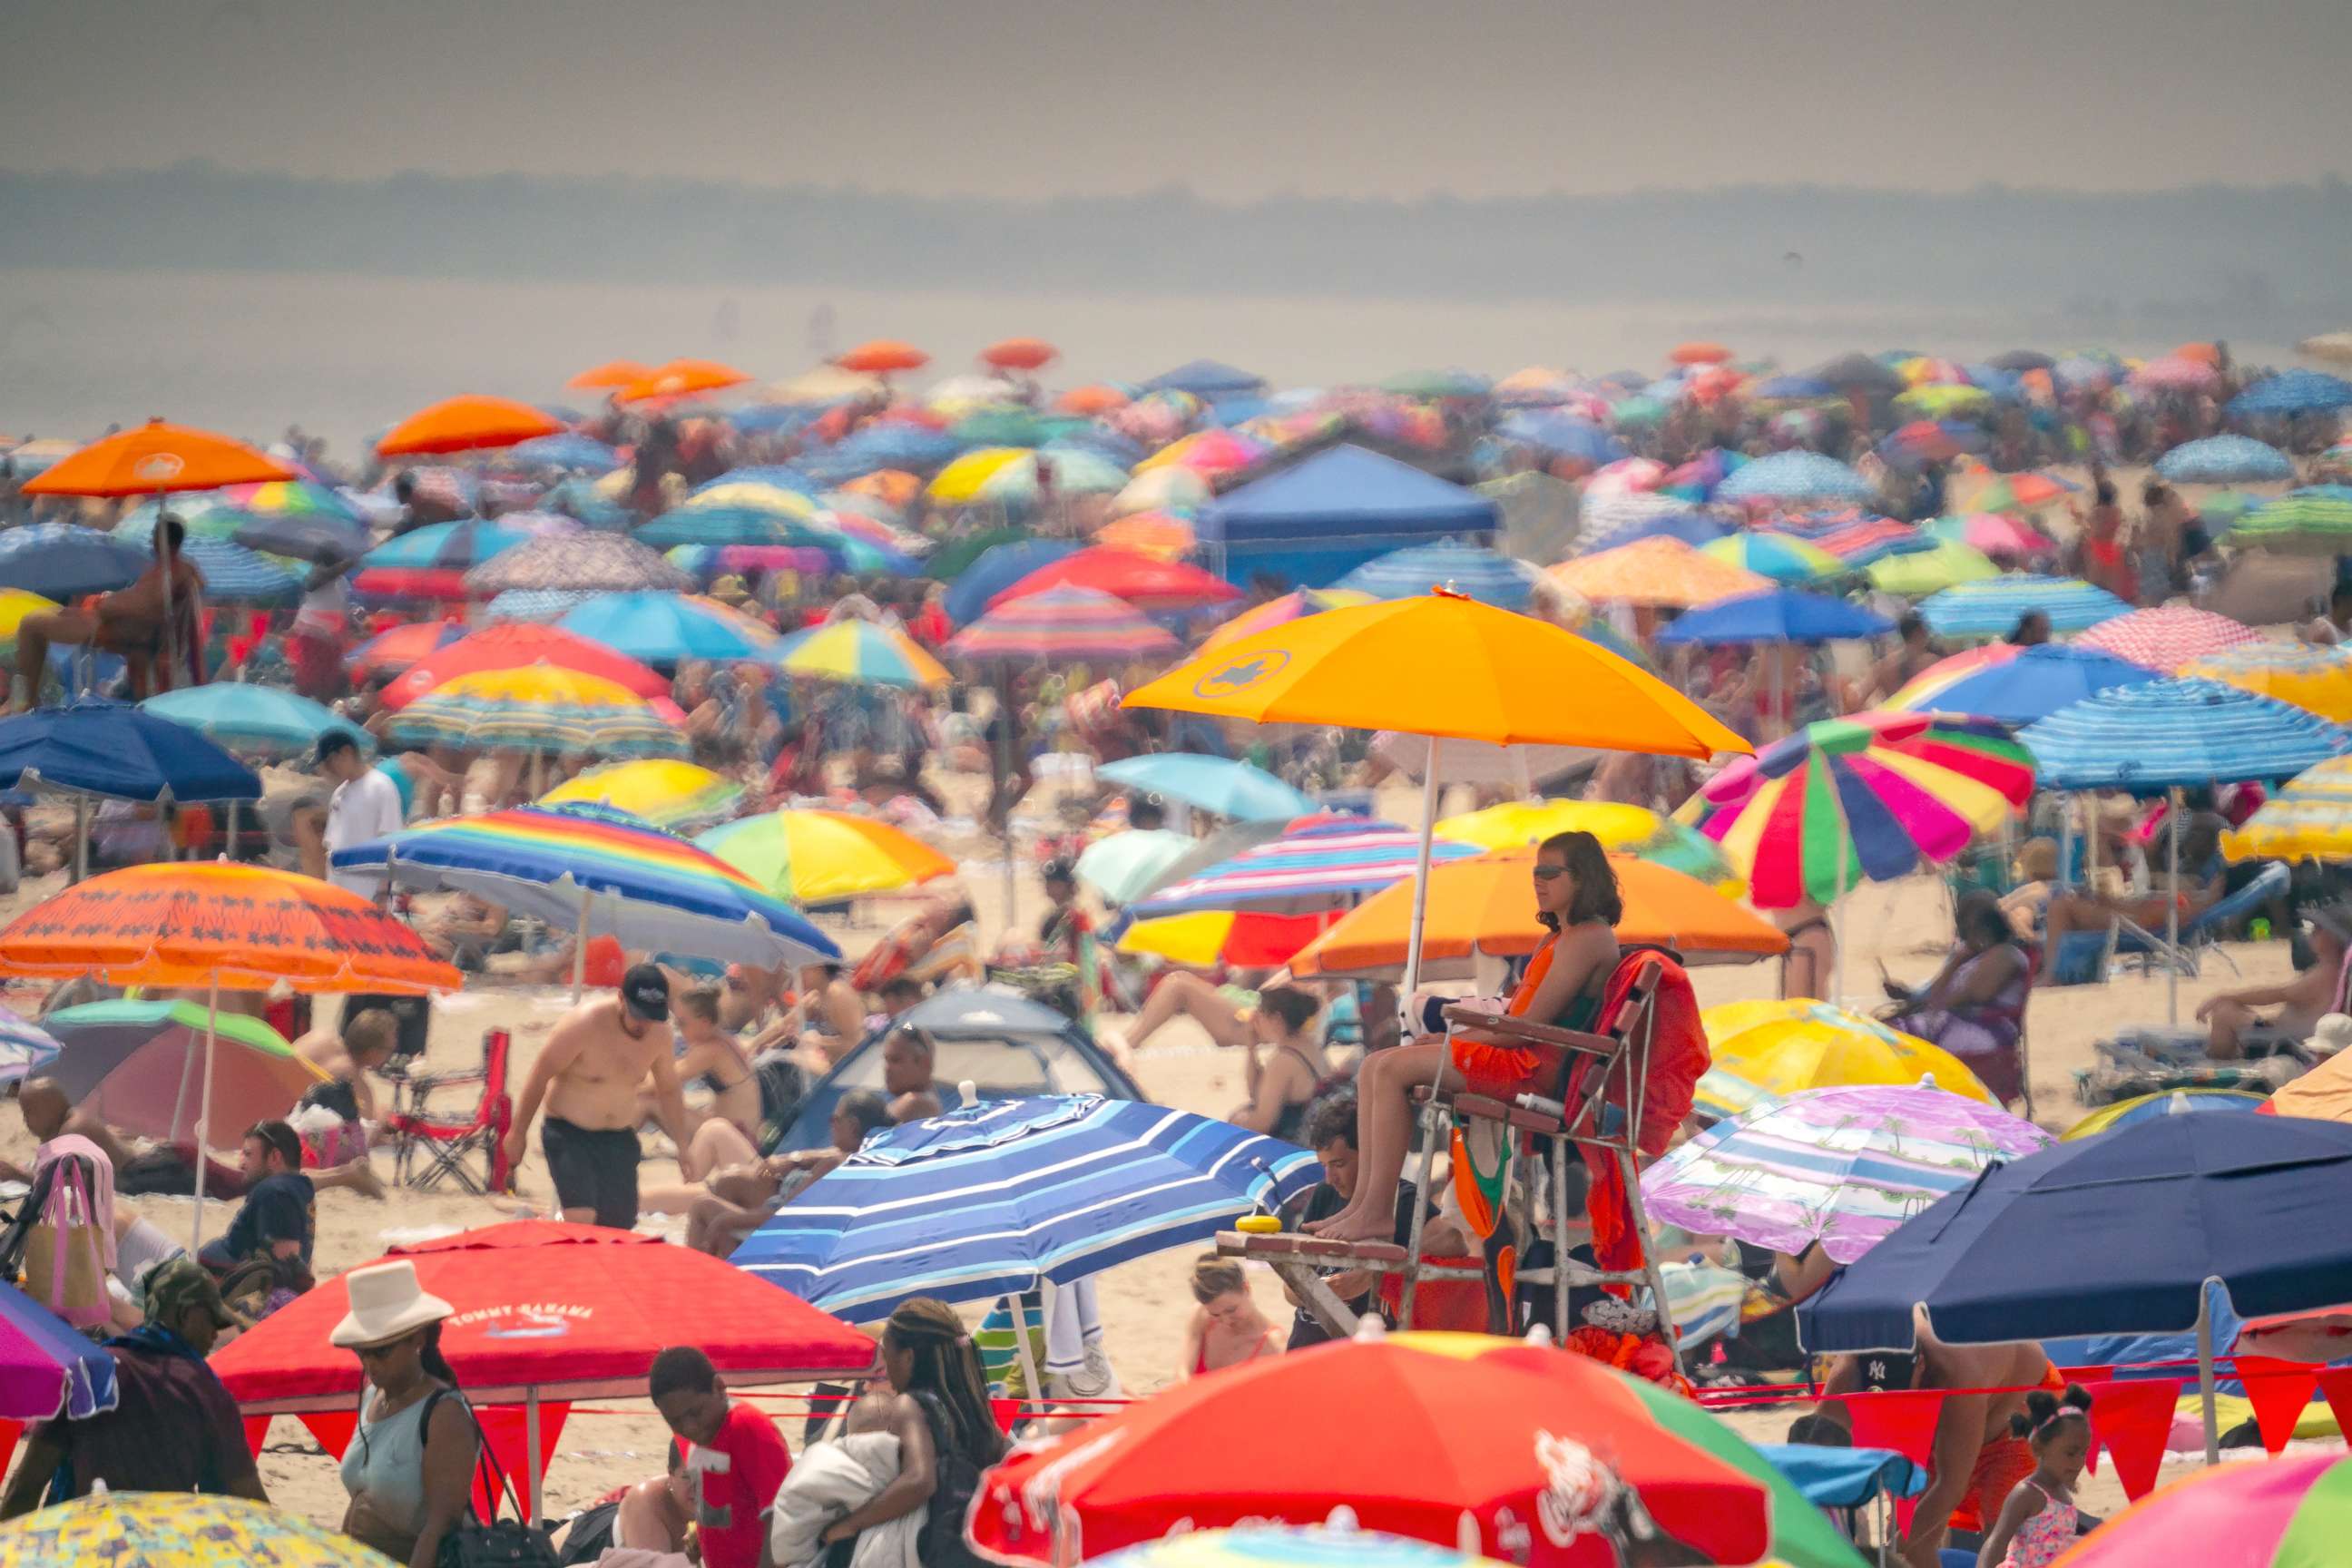 PHOTO: Thousands of beach goers literally pack the beach trying to beat the oppressive heat and escape to Coney Island, in Brooklyn, N.Y., July 1, 2018.